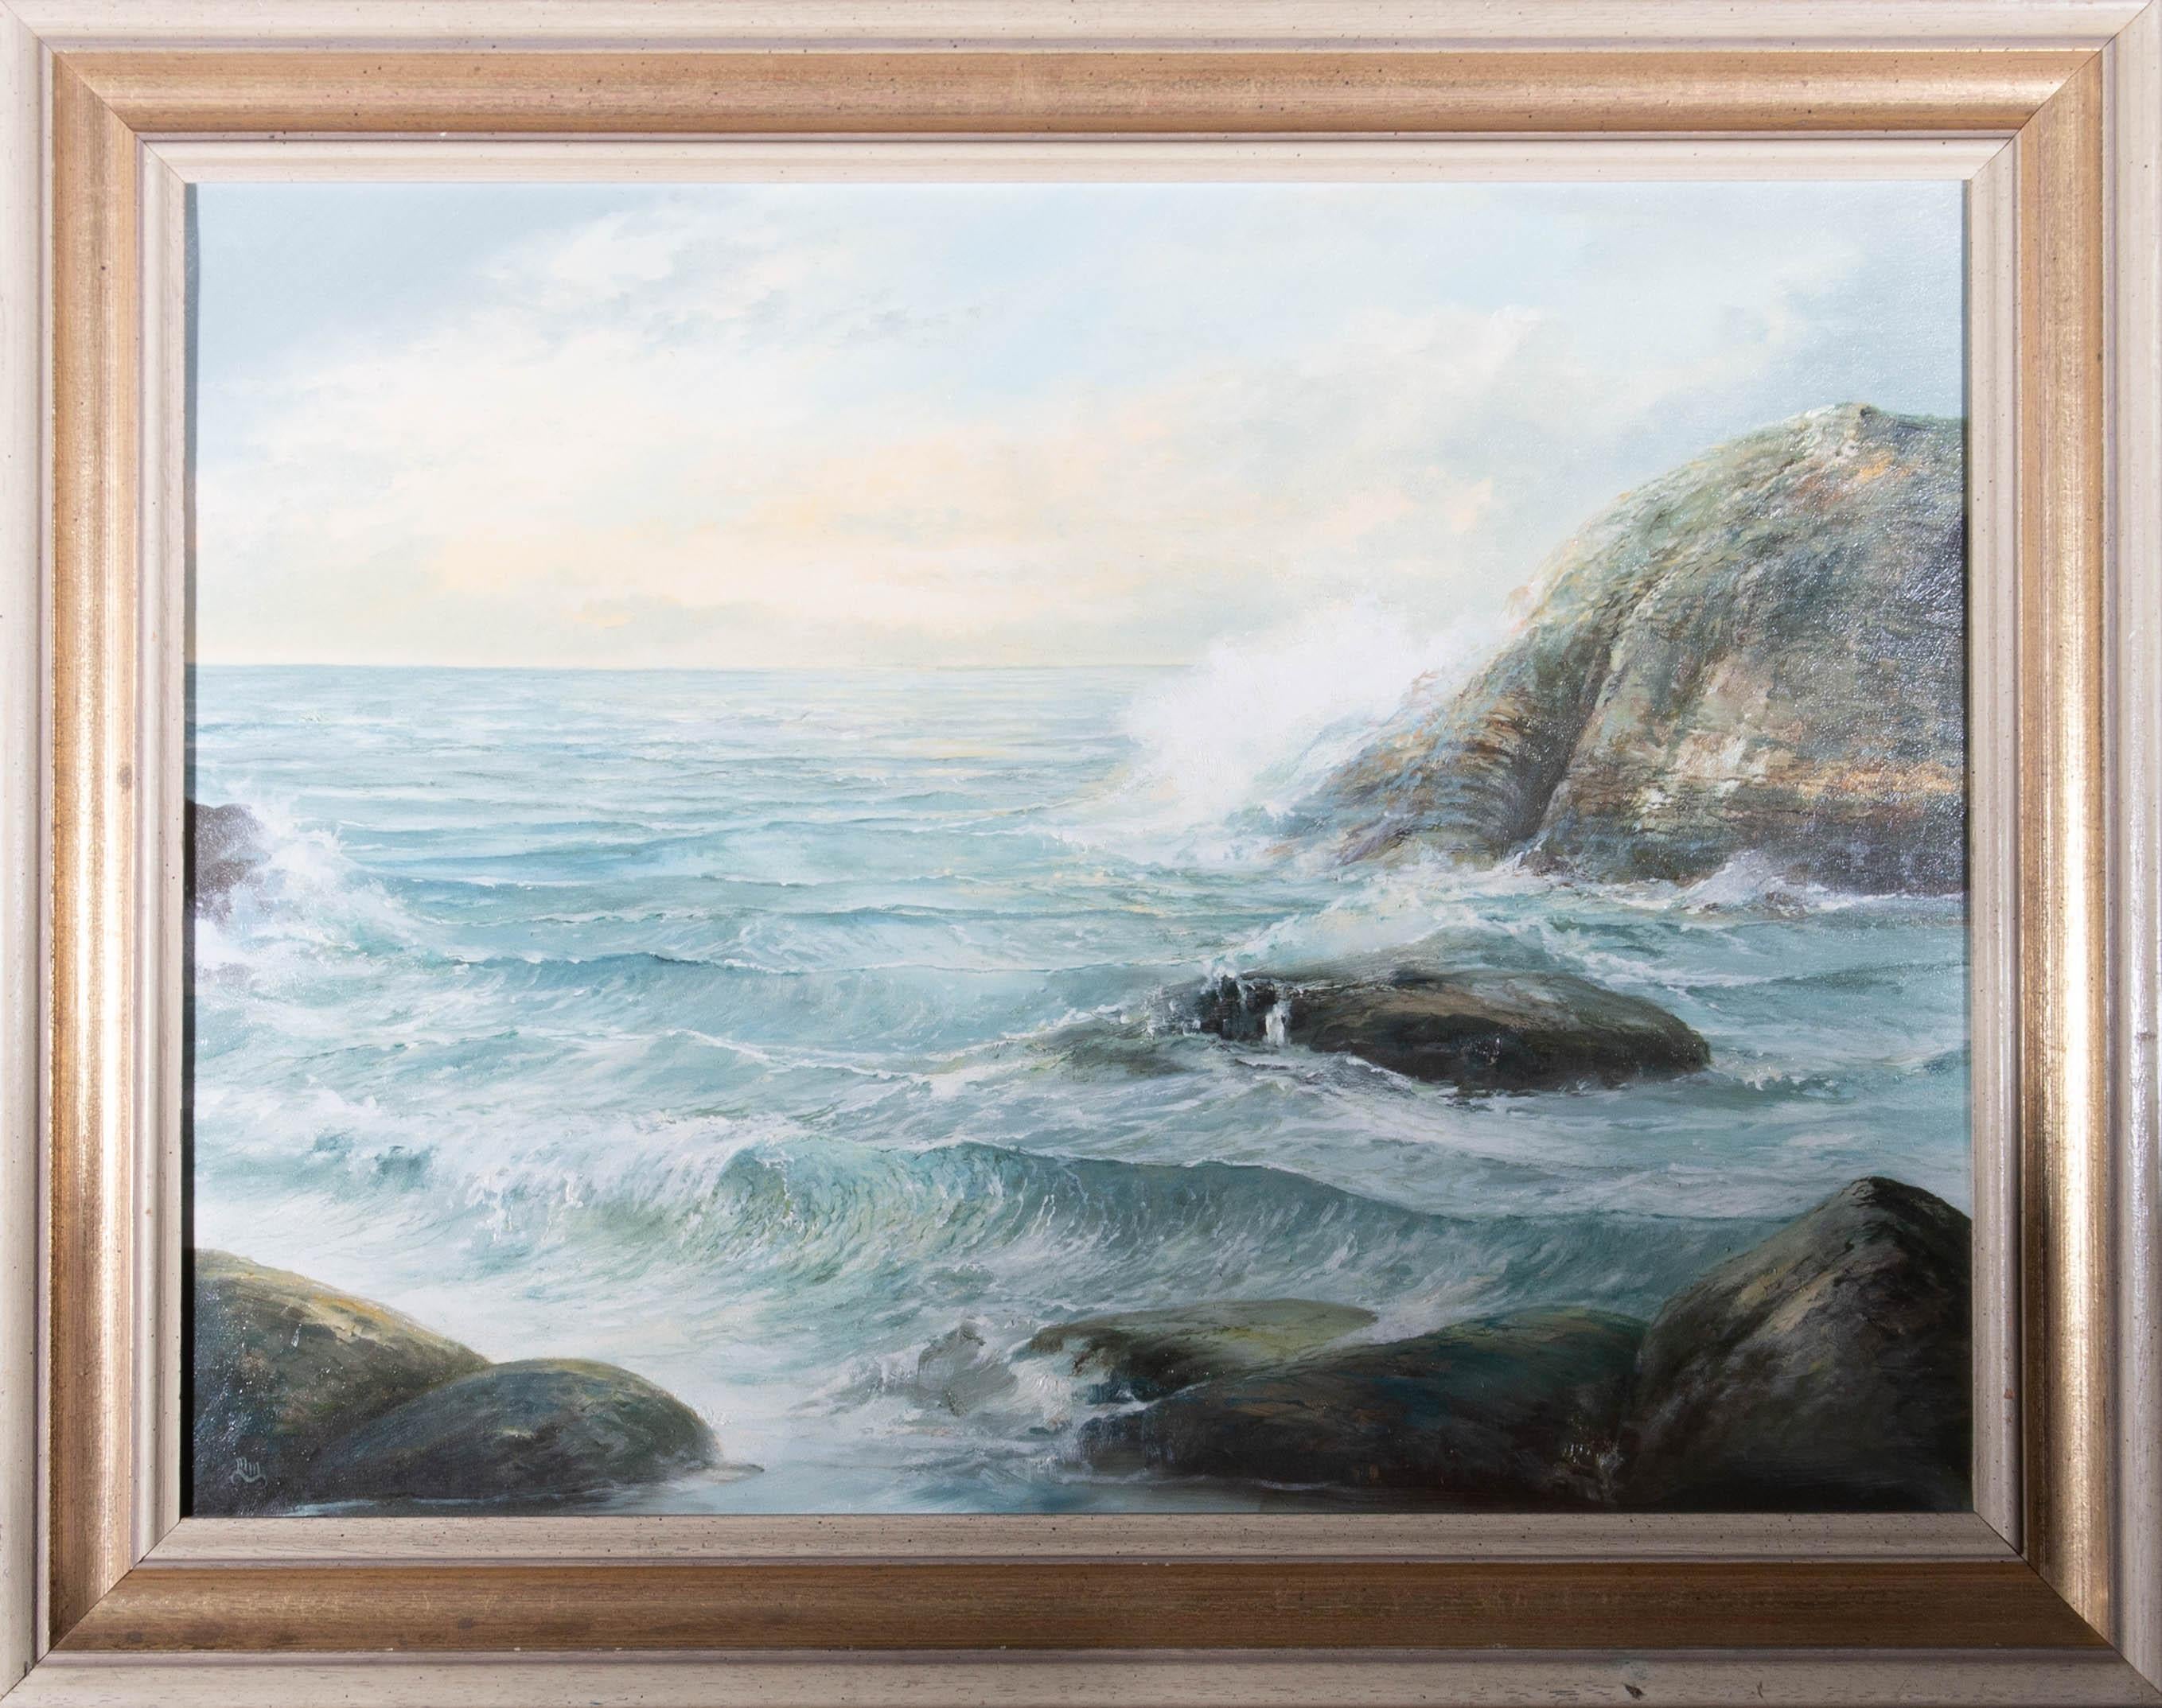 A captivating oil painting, depicting a seascape with waves
breaking on a rocky outcrop. Monogrammed to the lower left-hand corner. Well-presented in a distressed, off-white and gilt frame, as shown. On canvas on stretchers.